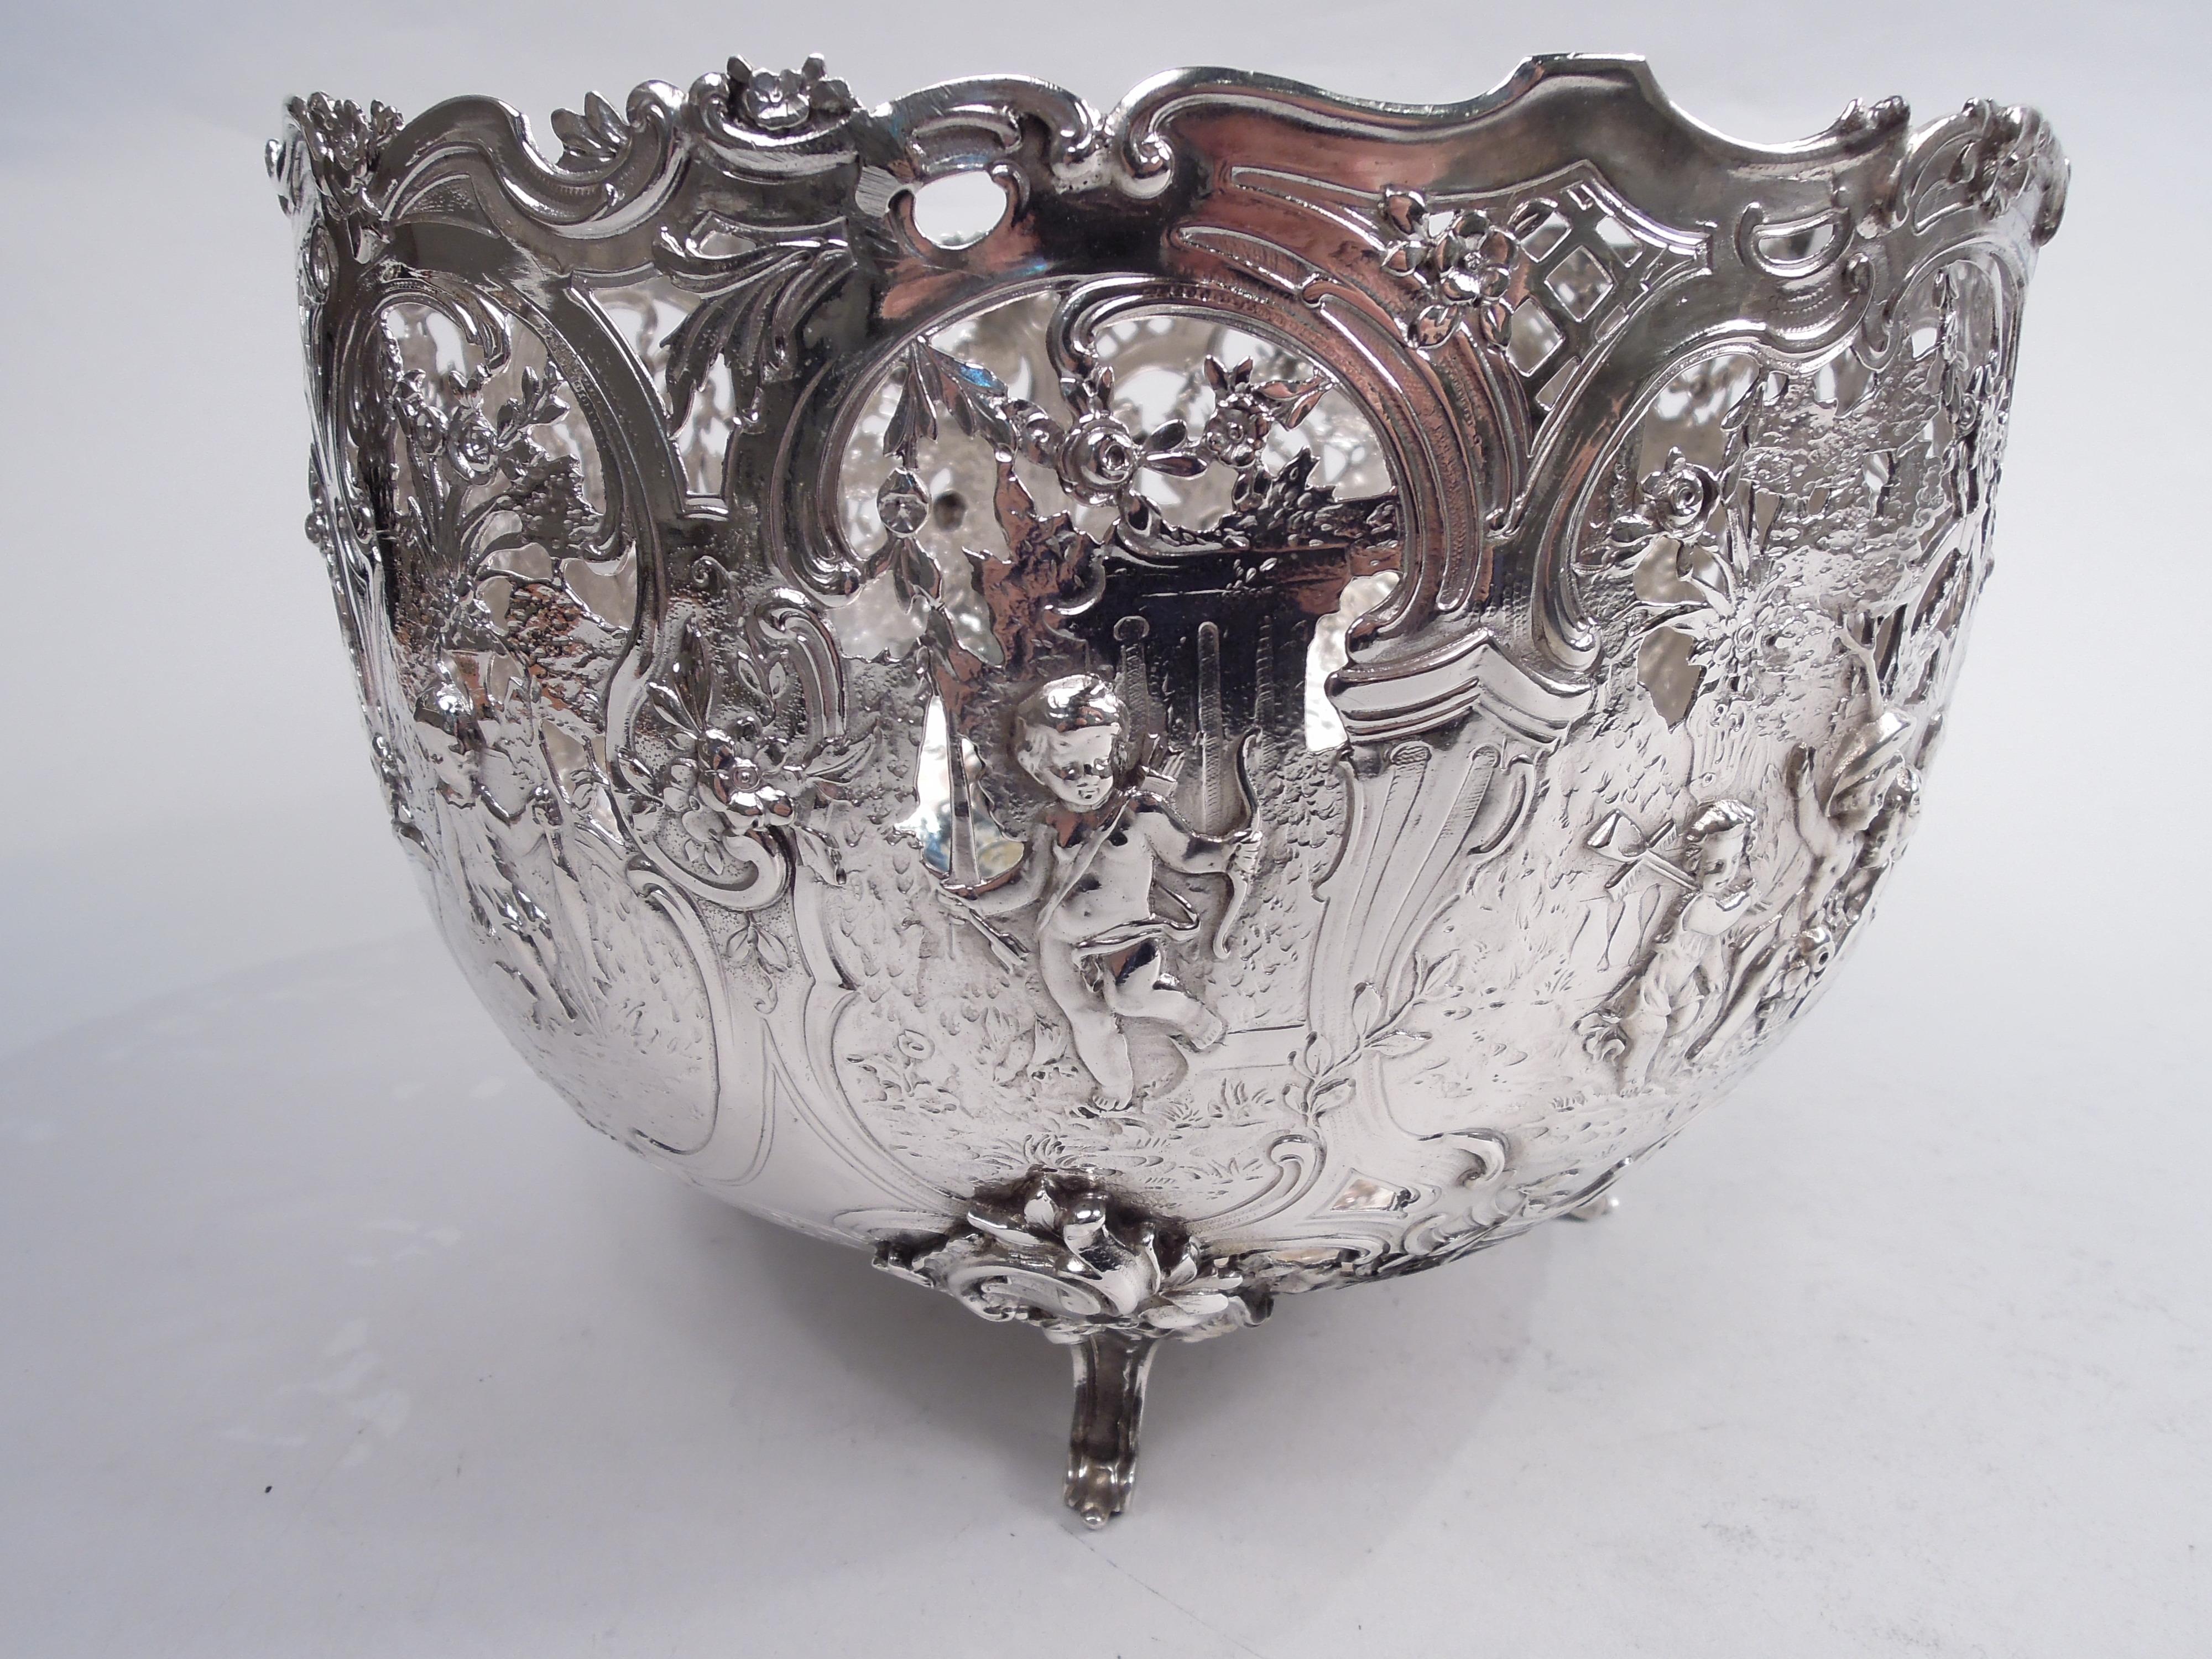 German Rococo 800 silver centerpiece bowl, ca 1910. Round and curved with 4 leafing scroll-mounted scroll supports. Chased and open sides with pastoral scenes in scrolled frames depicting cherubs playing at gardening, fishing, and hunting in a